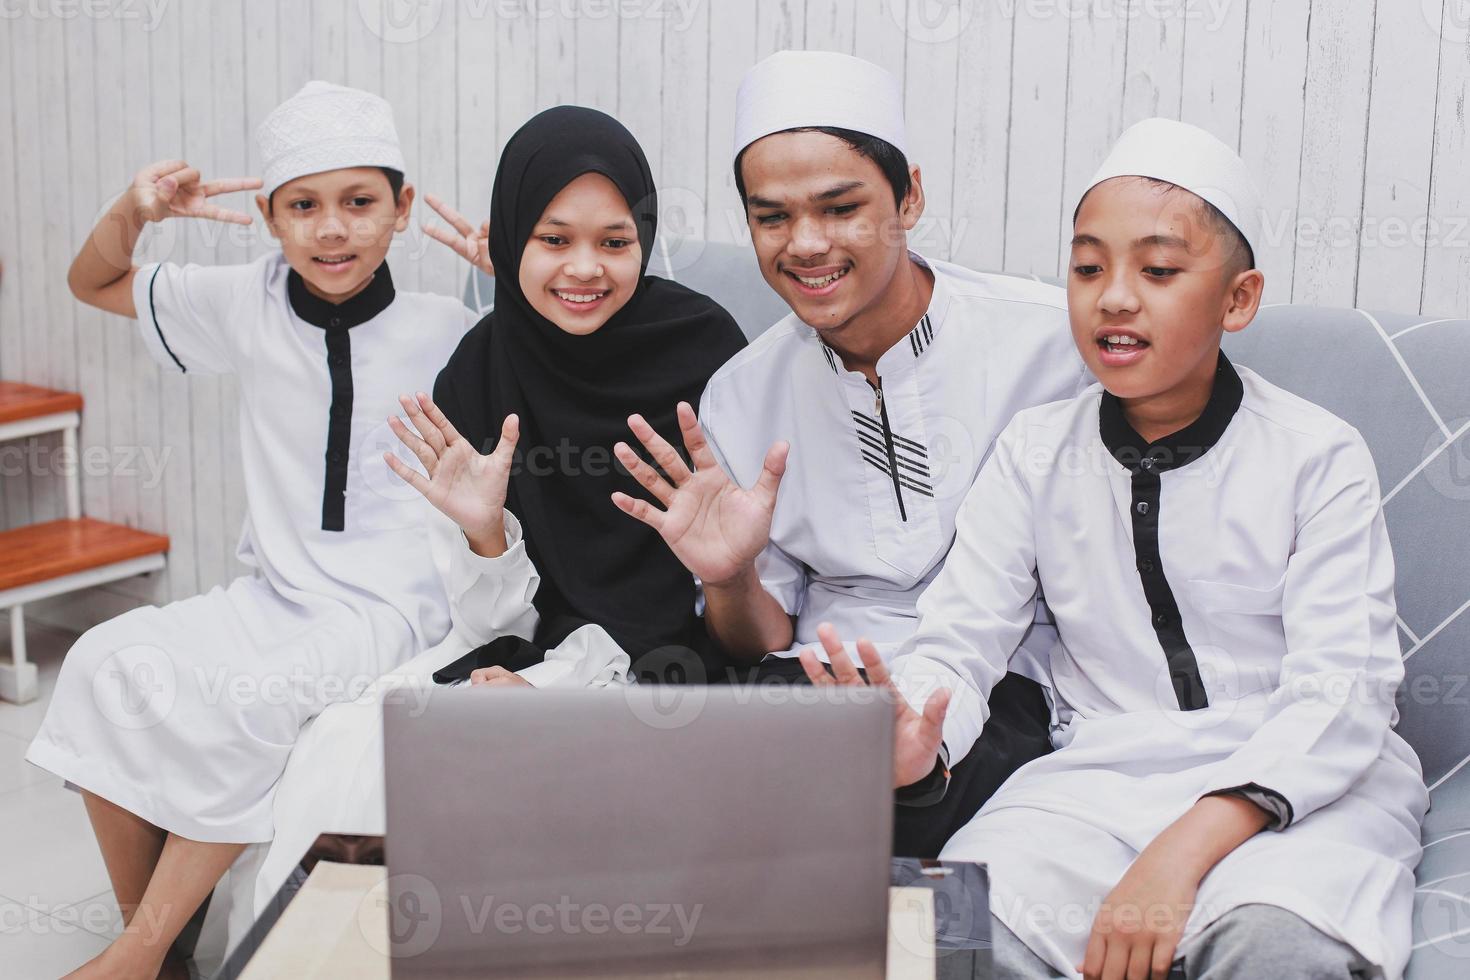 Happy Muslim family doing video conversation in front a laptop with say hi or greet gesture by hand on Eid Mubarak celebration photo